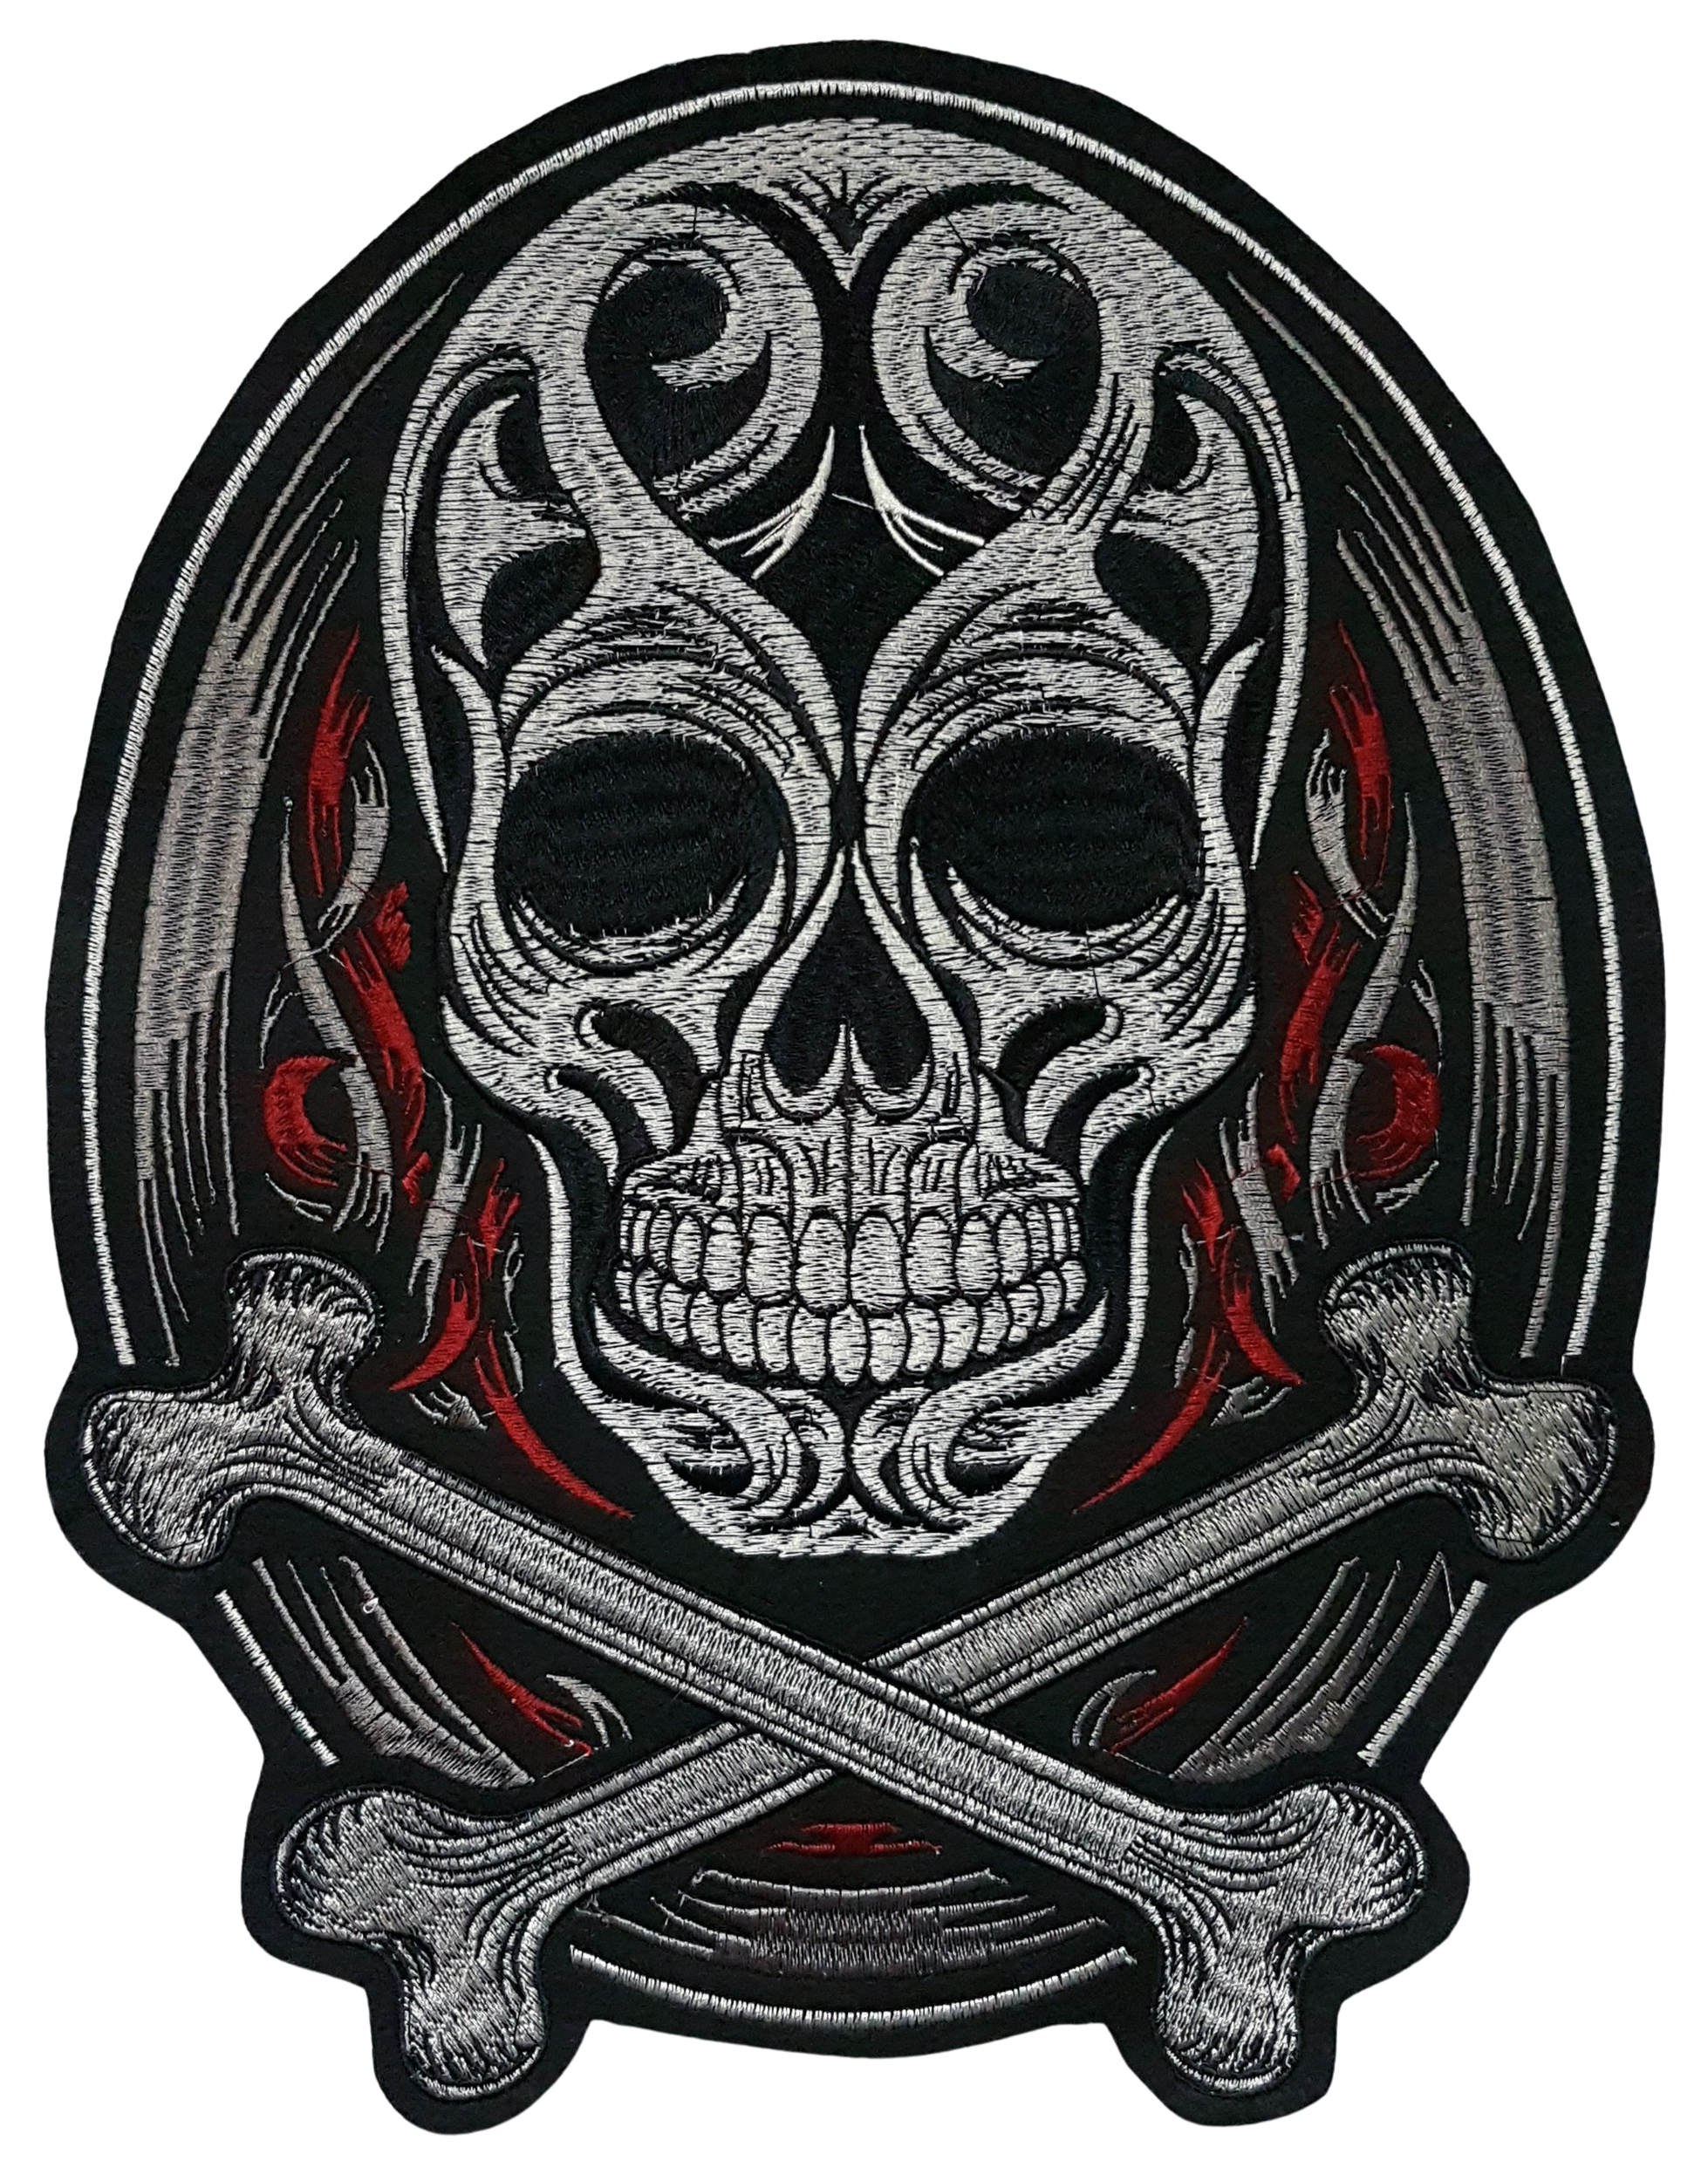 Grand Patch Thermocollant Skull Tribal et OS